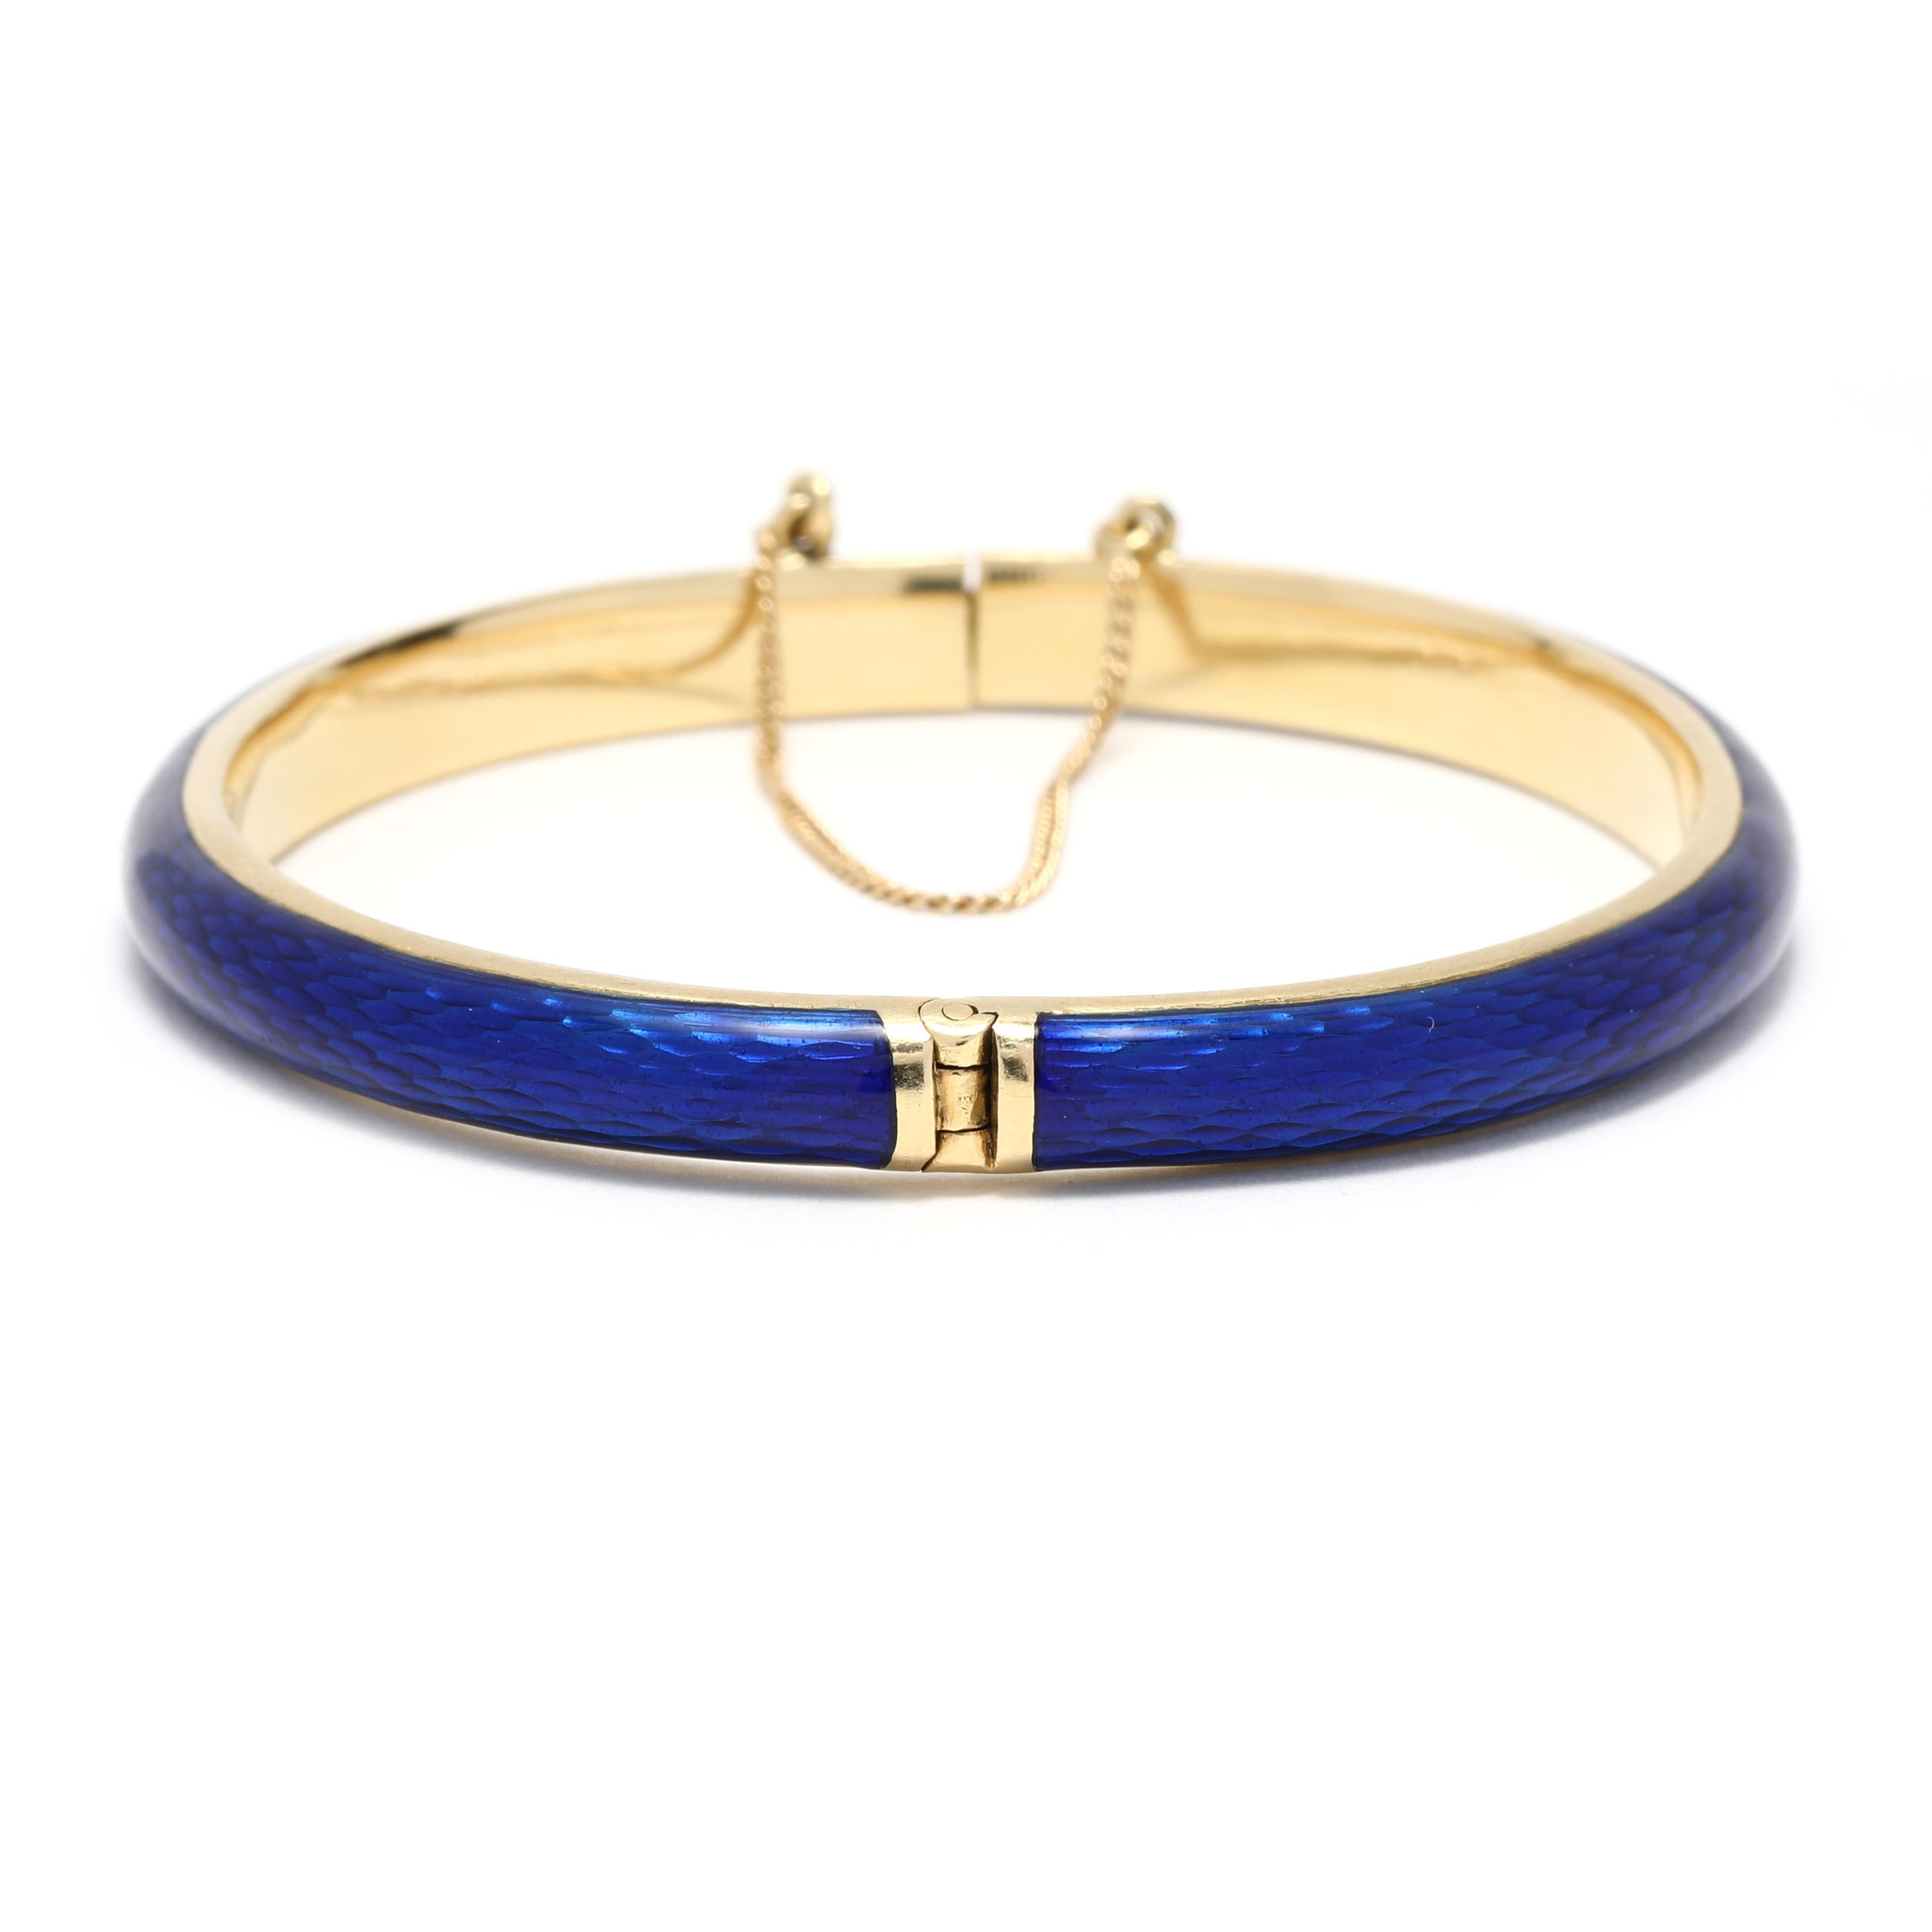 This exquisite Italian Blue Enamel Solid Gold Bangle Bracelet is crafted in 18K Yellow Gold and measures 6.5 inches in length. This elegant bangle bracelet is perfect for everyday wear and makes a great addition to any jewelry collection. This